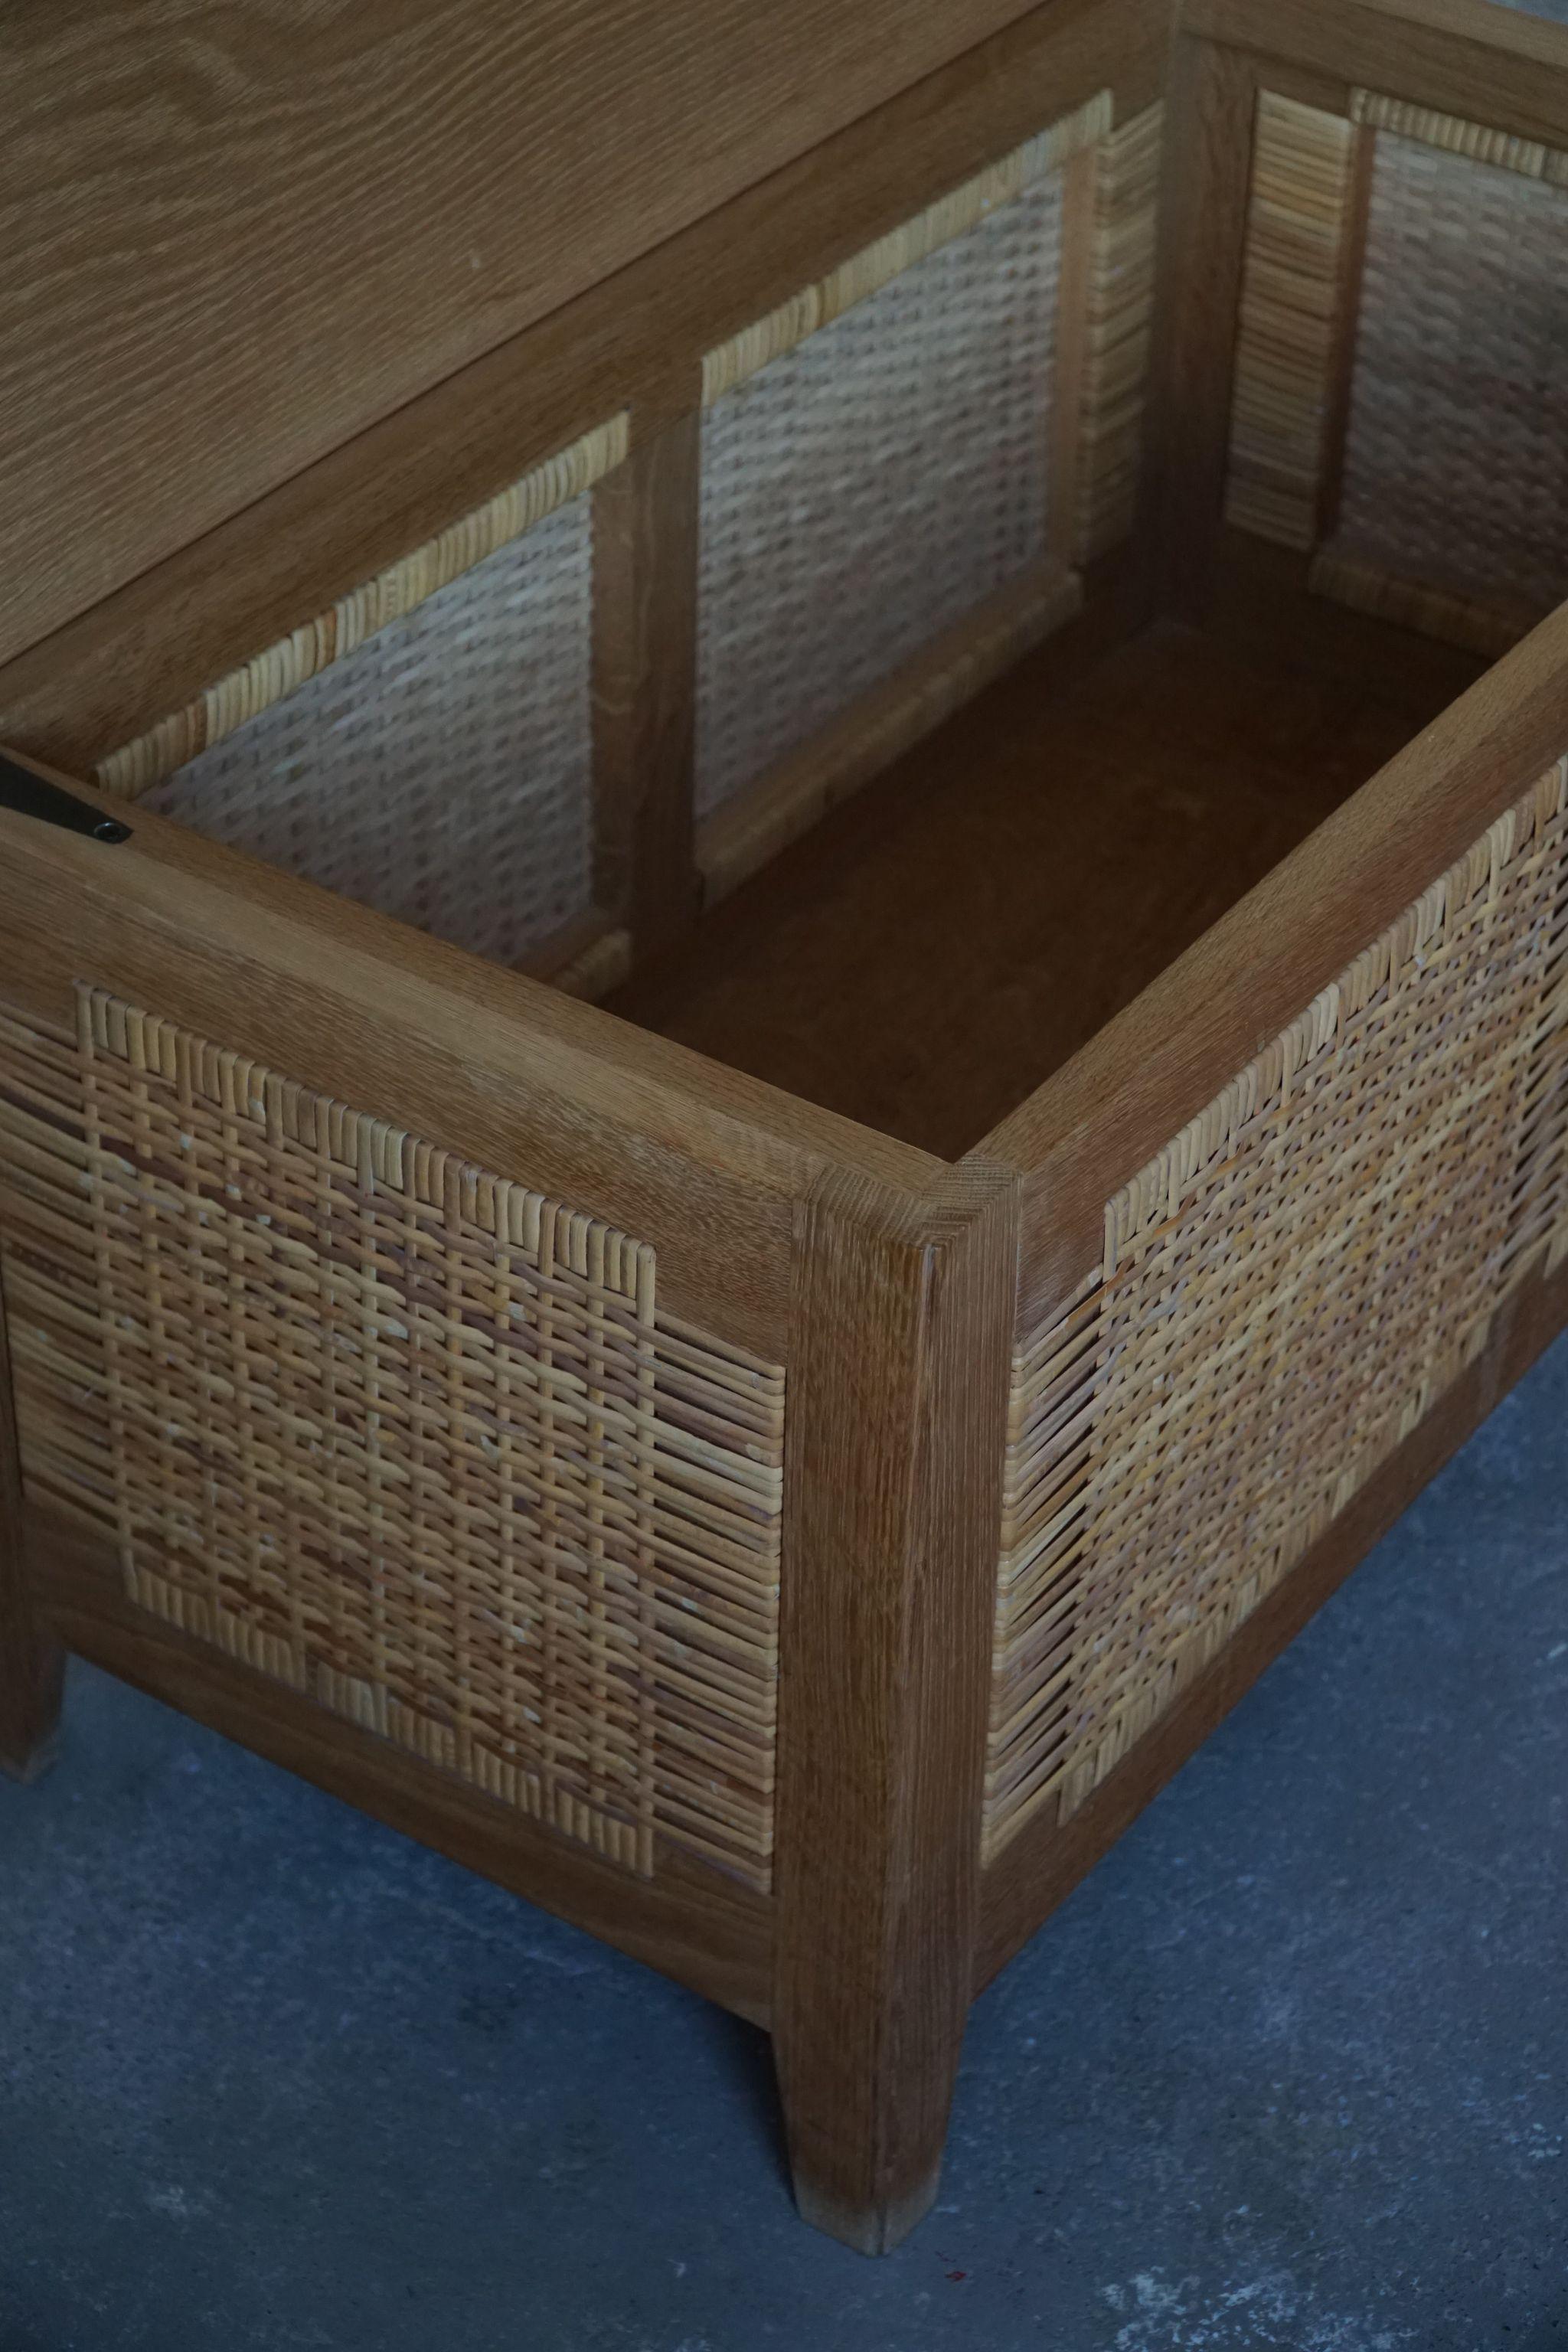 Hand-Woven Kai Winding Chest / Bench in Cane & Oak, Made for Poul Hundevad, 